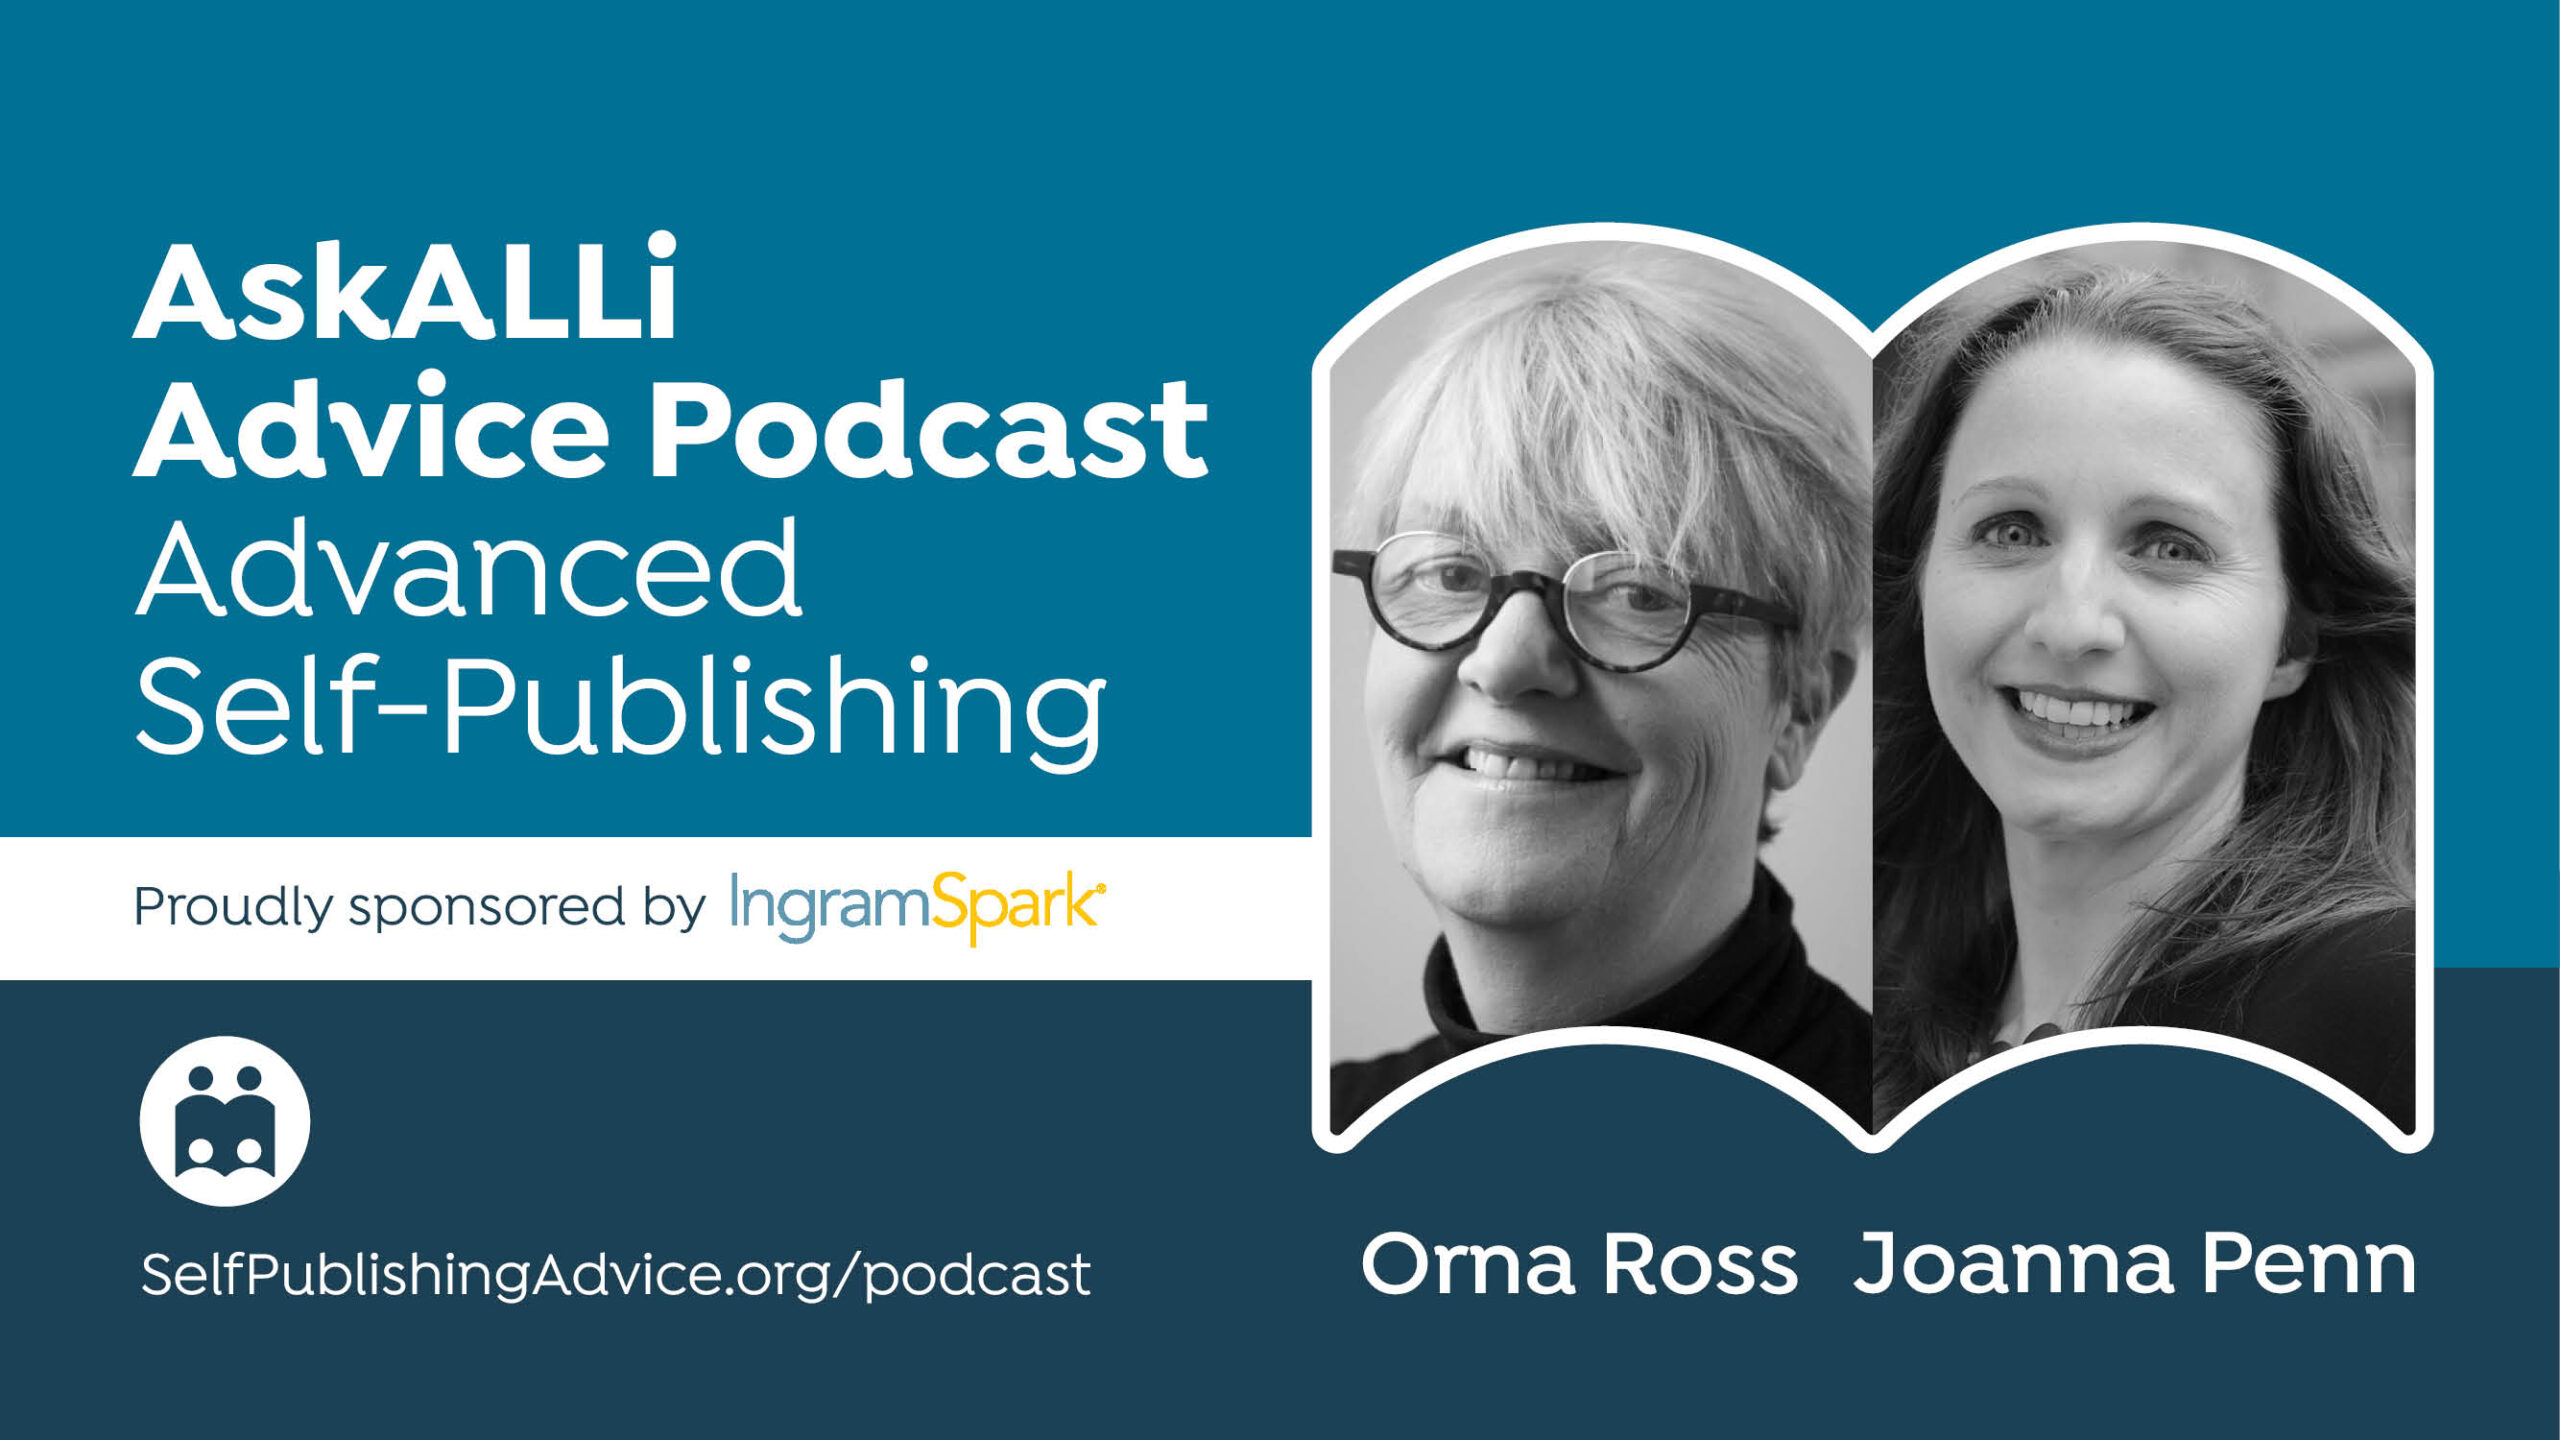 Ten Years Of Self-Publishing: A Personal Look Back And Forward. Advanced Self-Publishing Podcast With Orna Ross And Joanna Penn